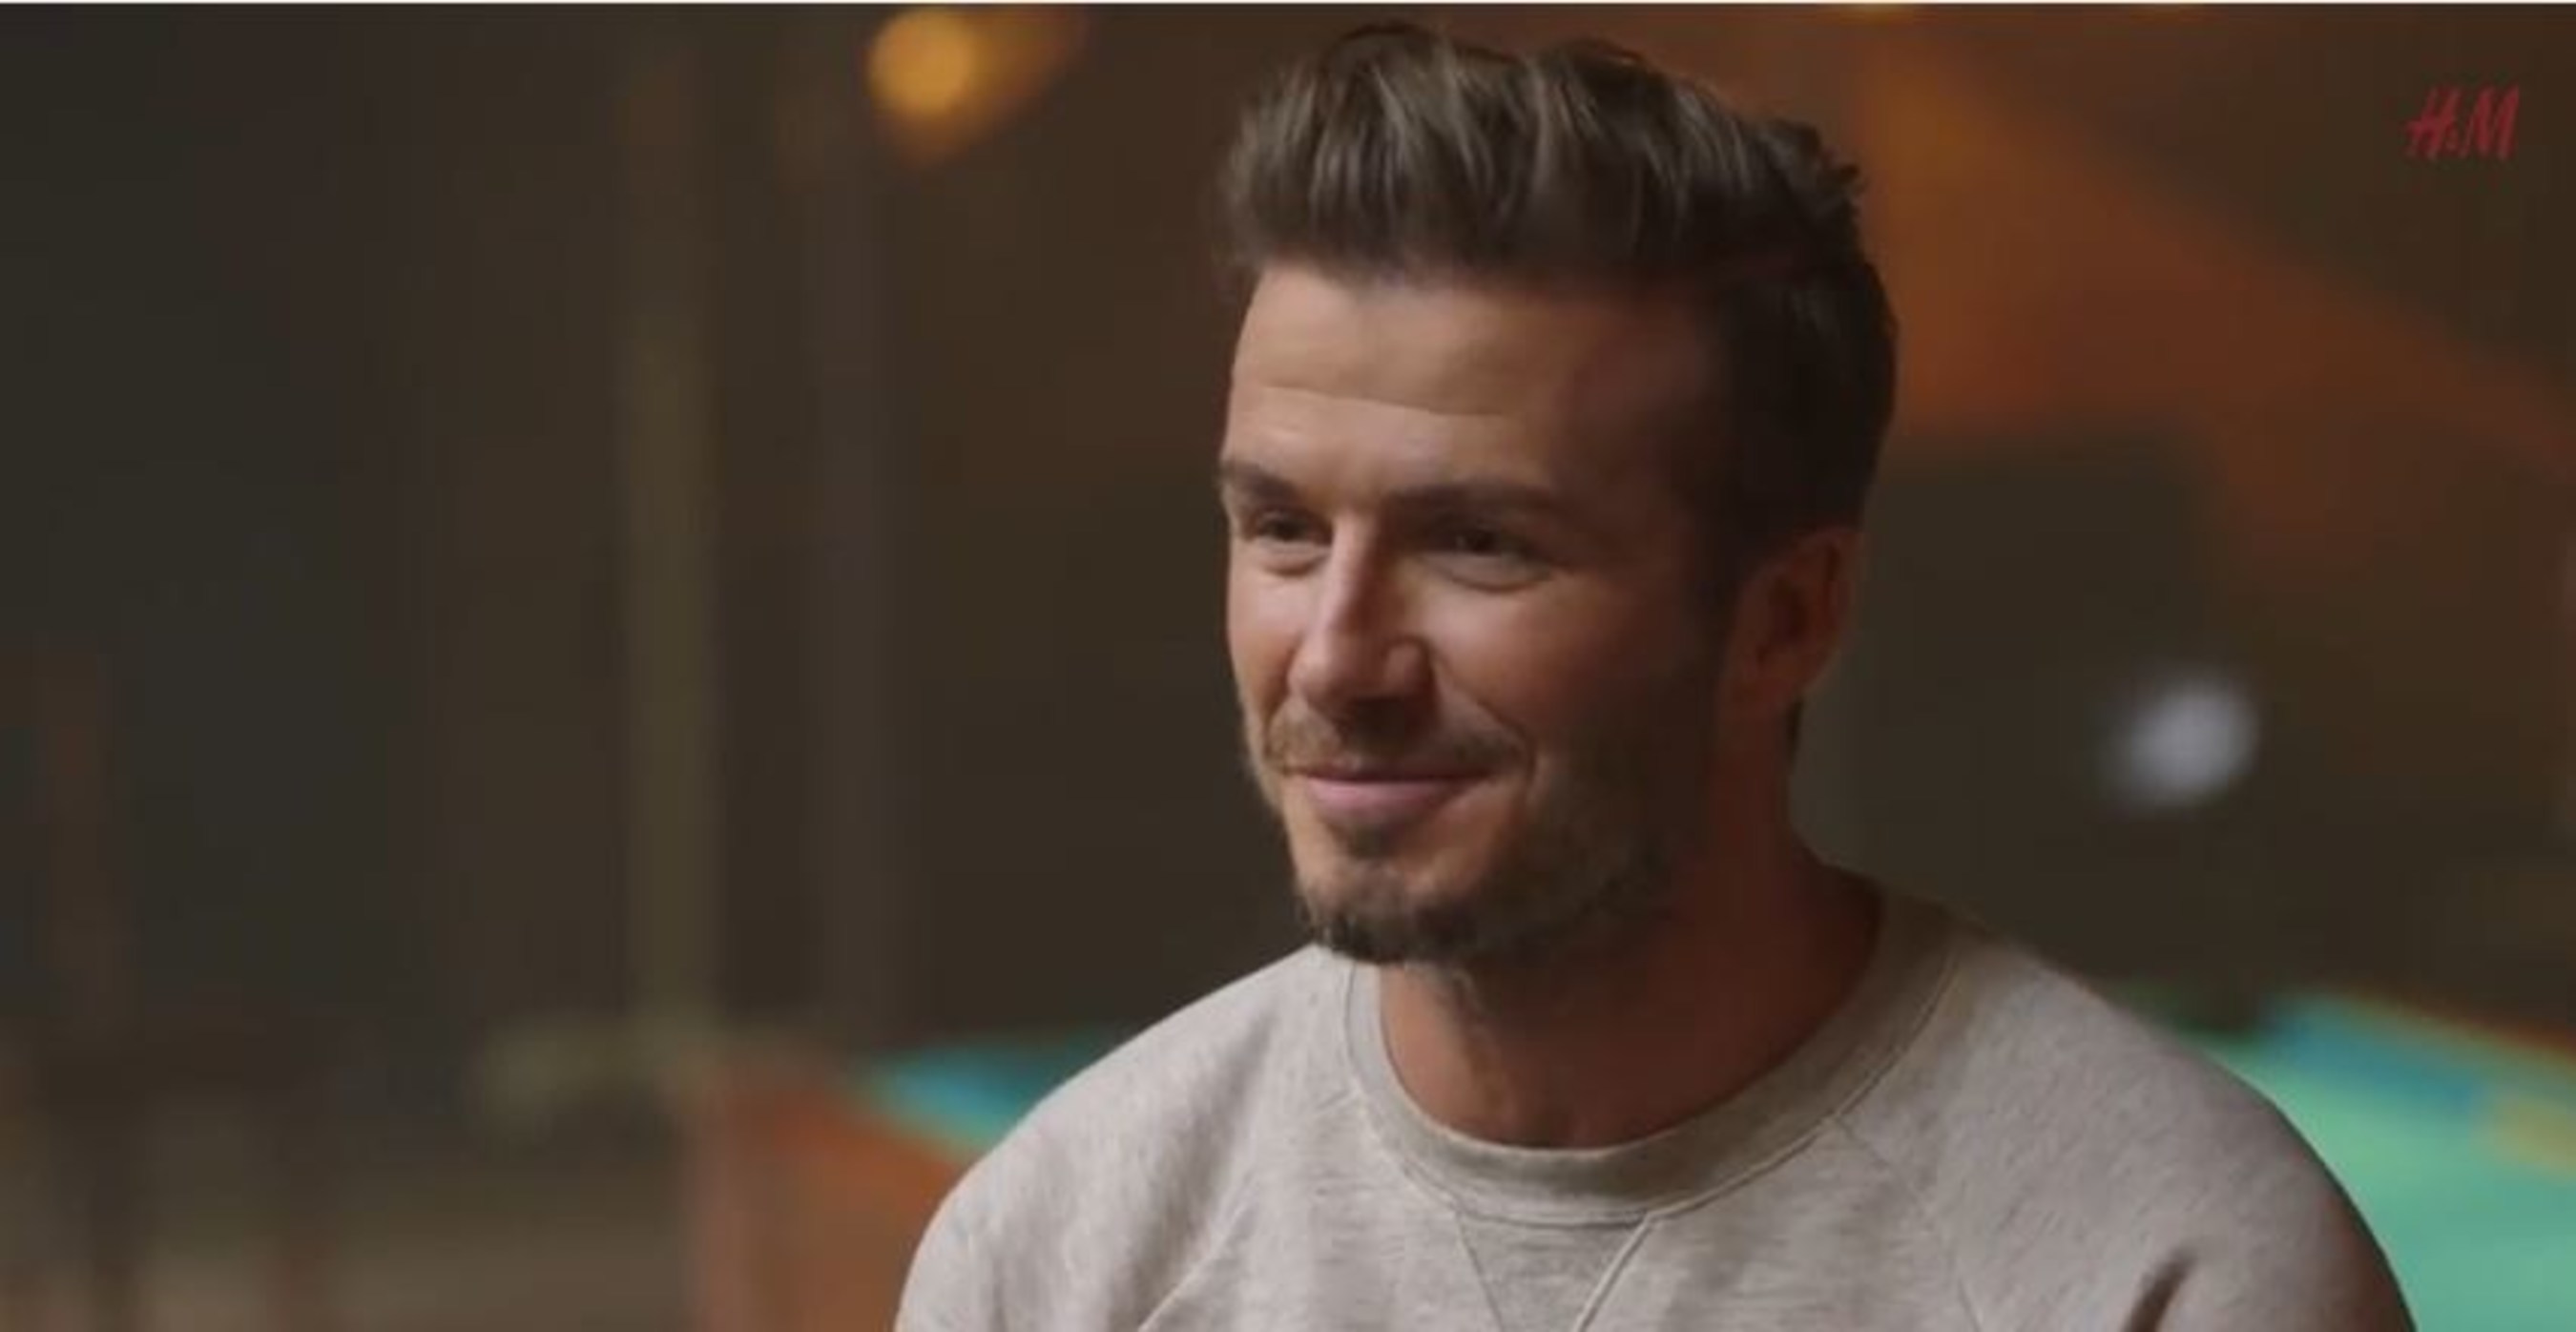 H&M Expands Relationship With David Beckham To Create A New Wardrobe For Men